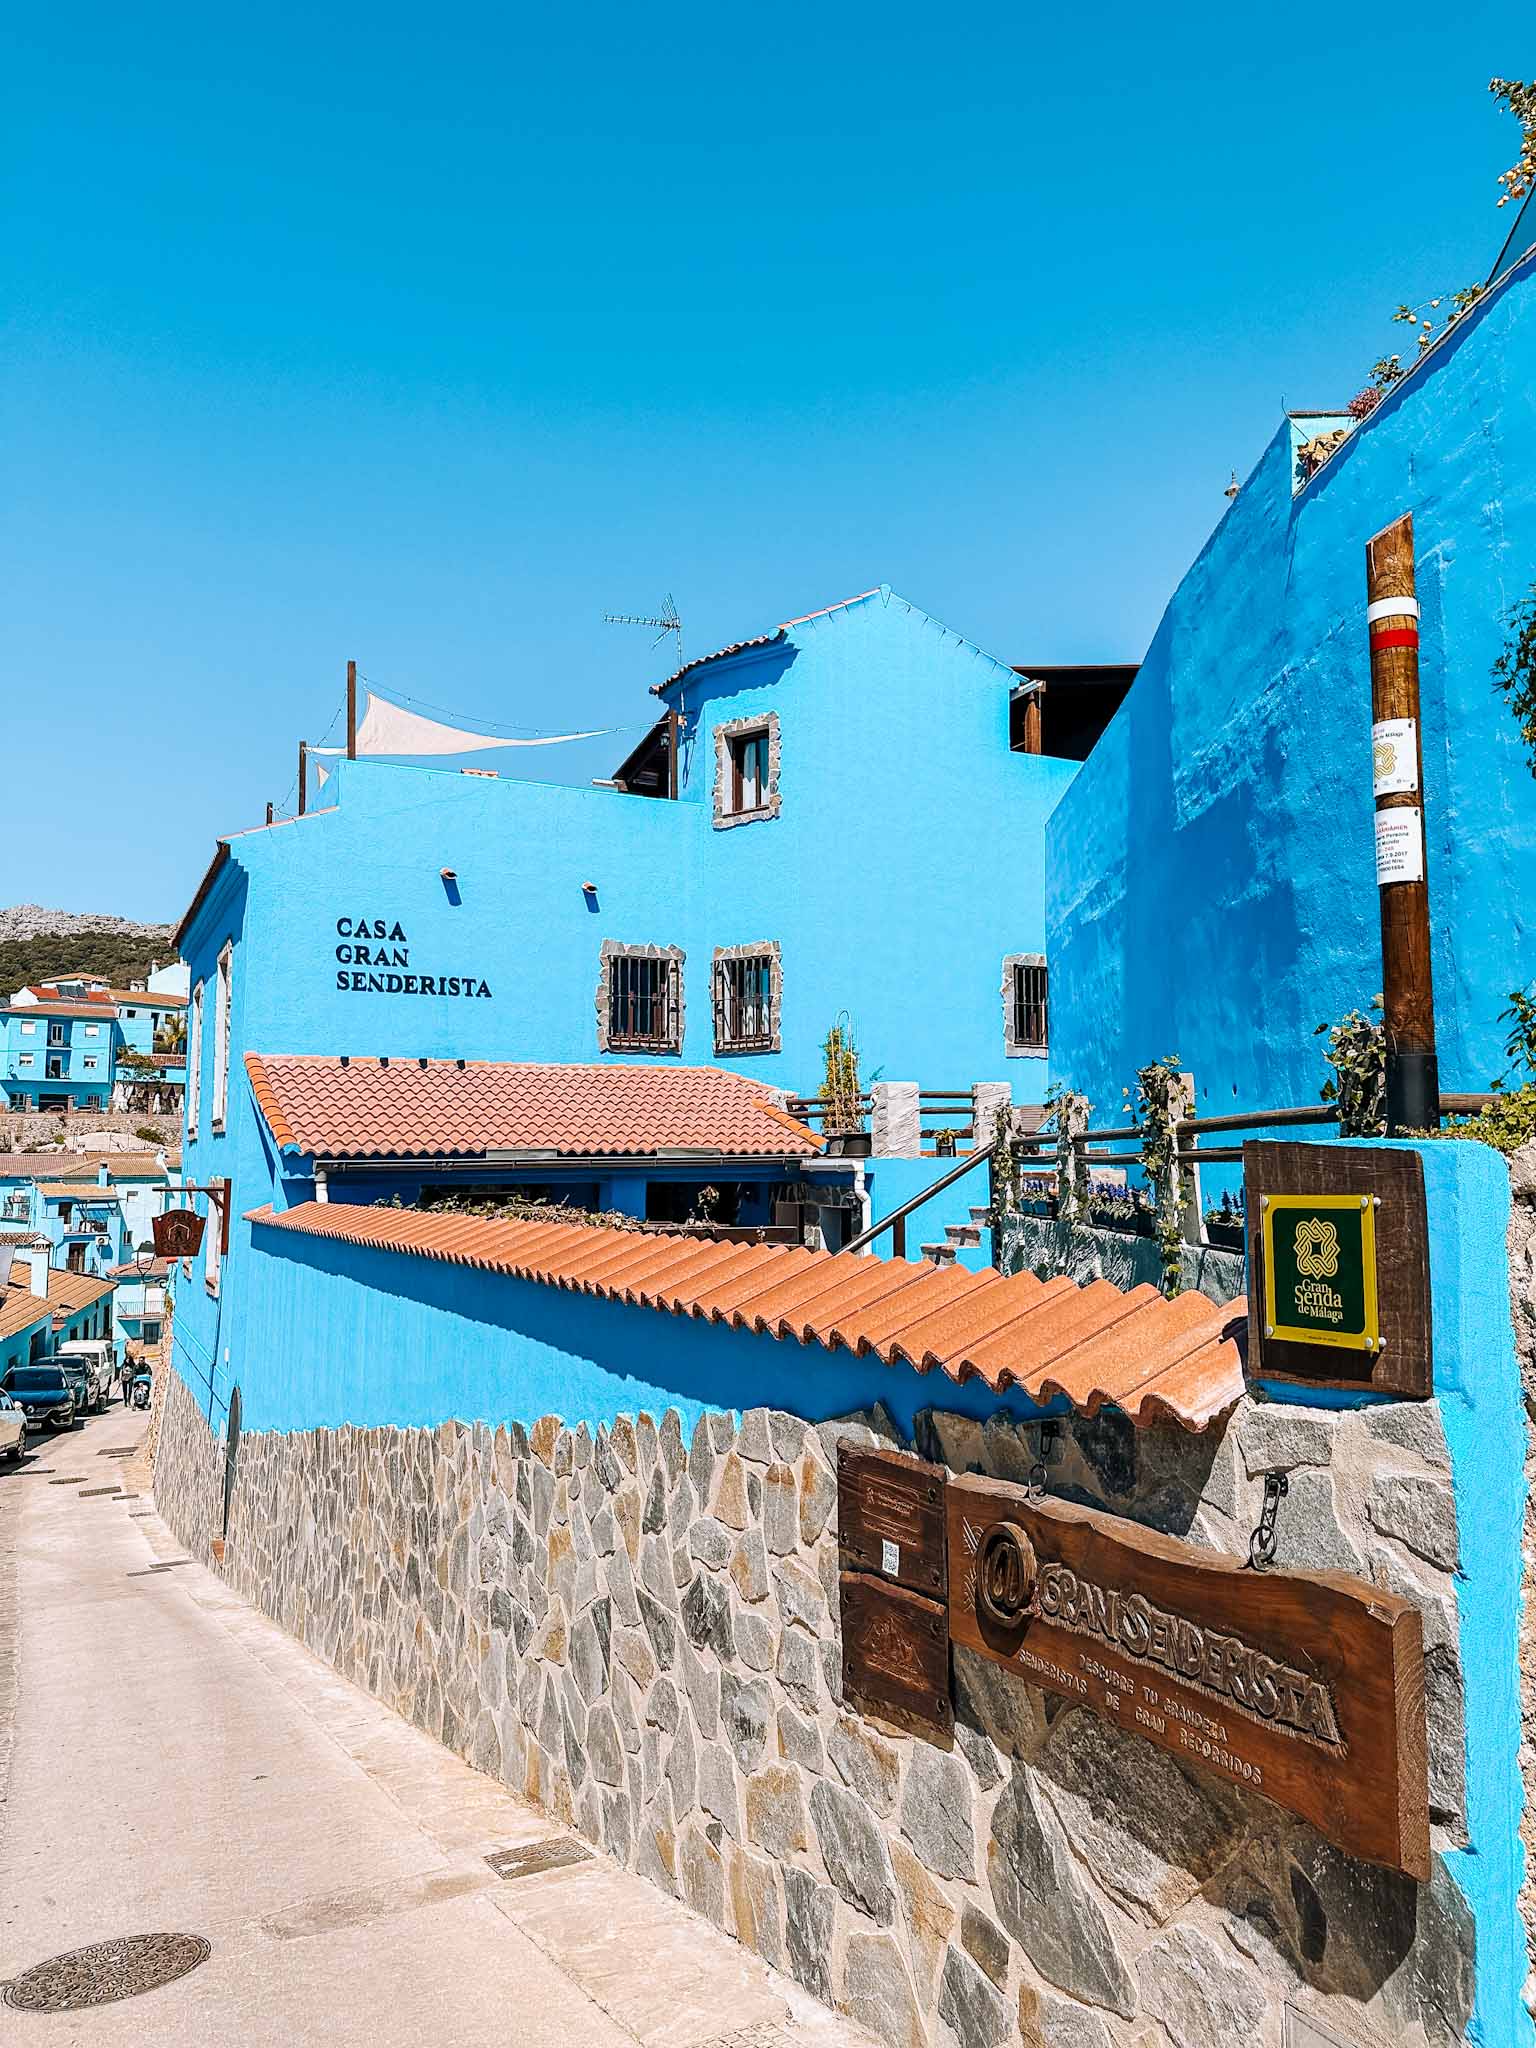 Juzcar, Malaga - best things to do and places to see in the blue Smurf village in Andalusia, Spain